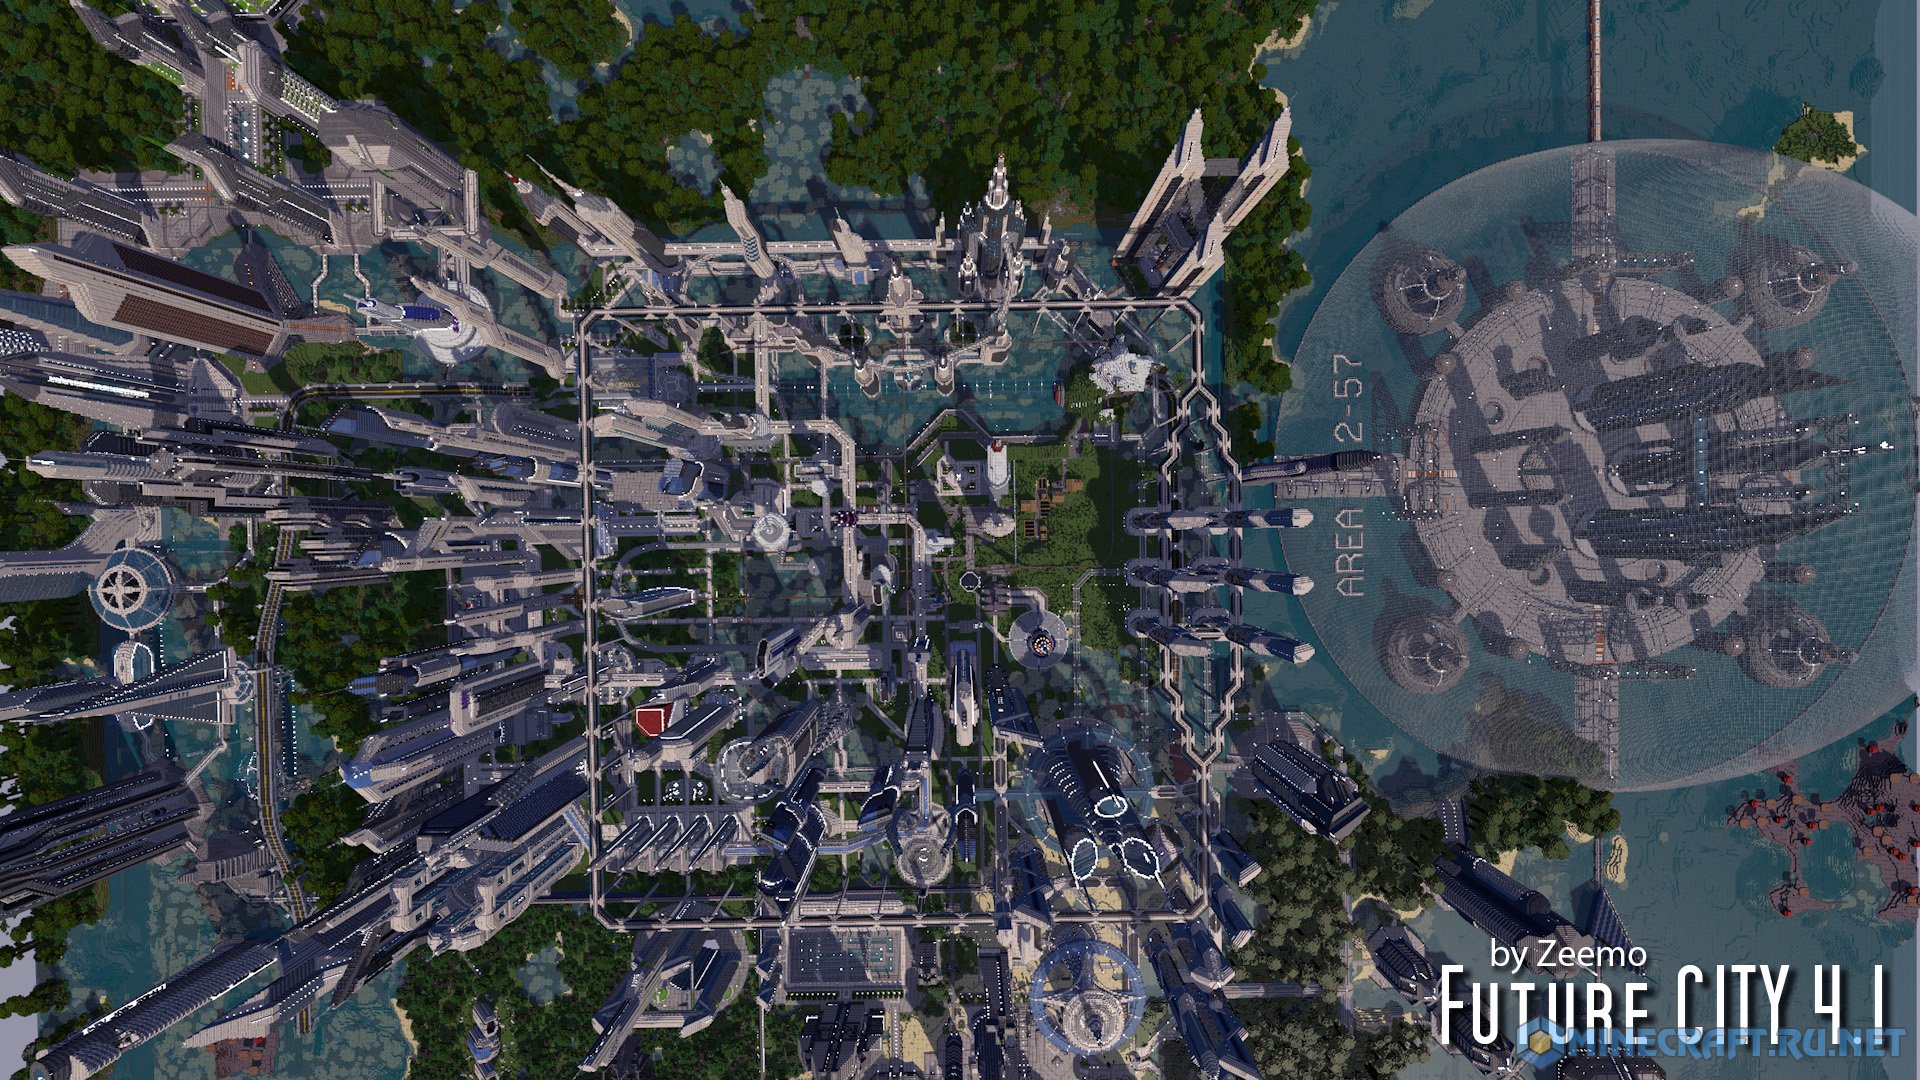 city texture map in minecraft in ps3